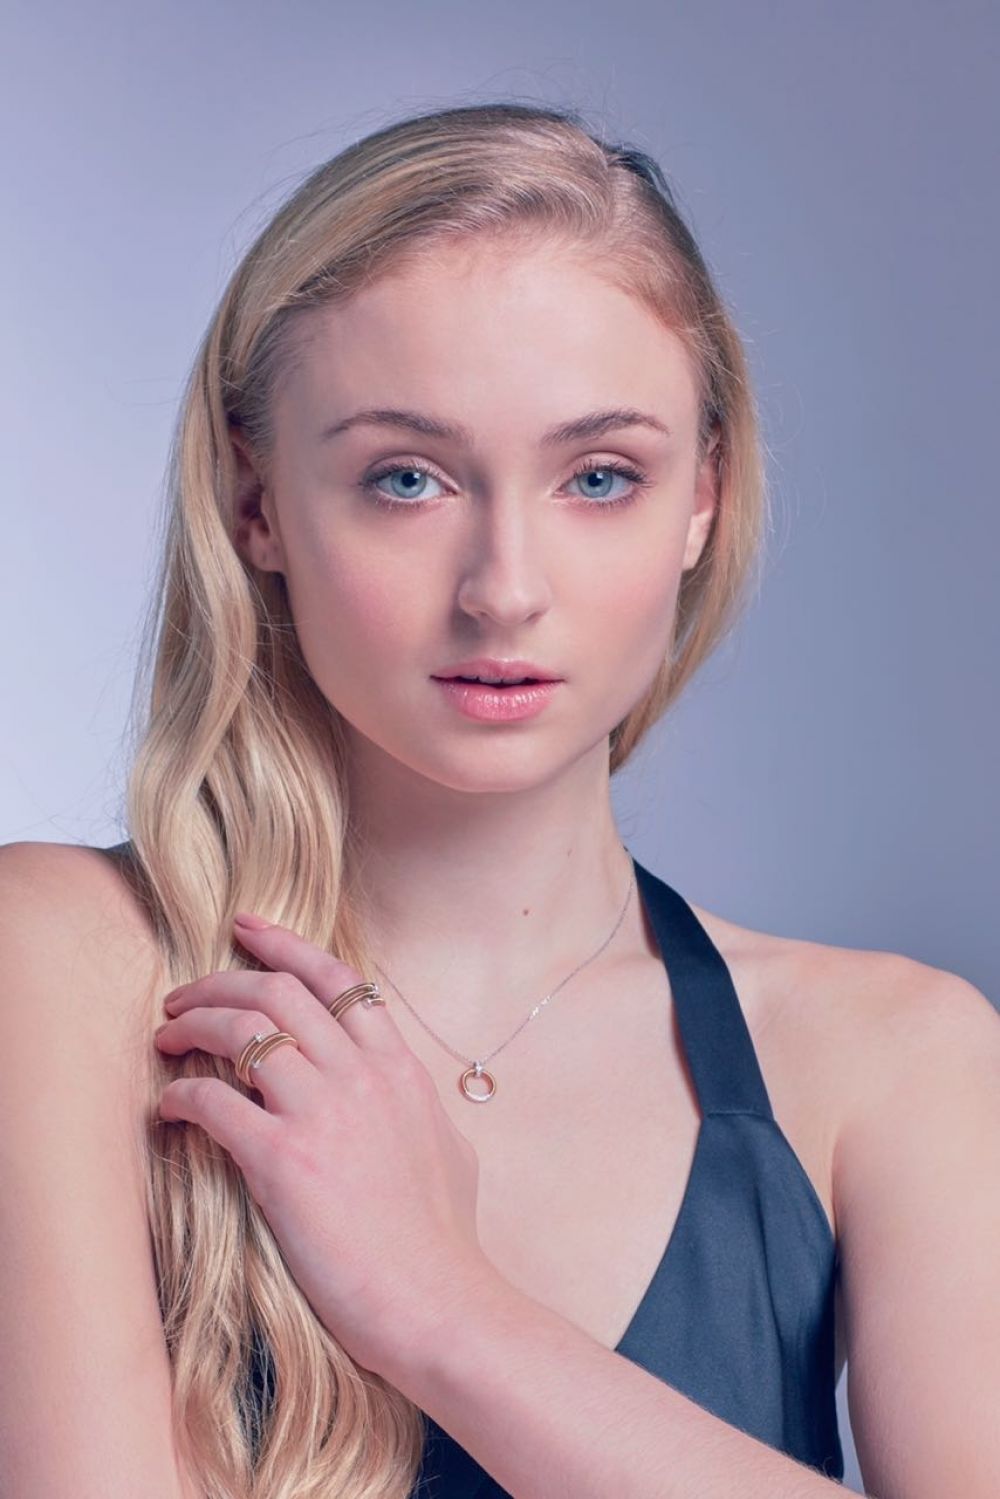 sophie-turner-at-giorgio-visconti-jewelry-collection-follow-me-2017_3.jpg